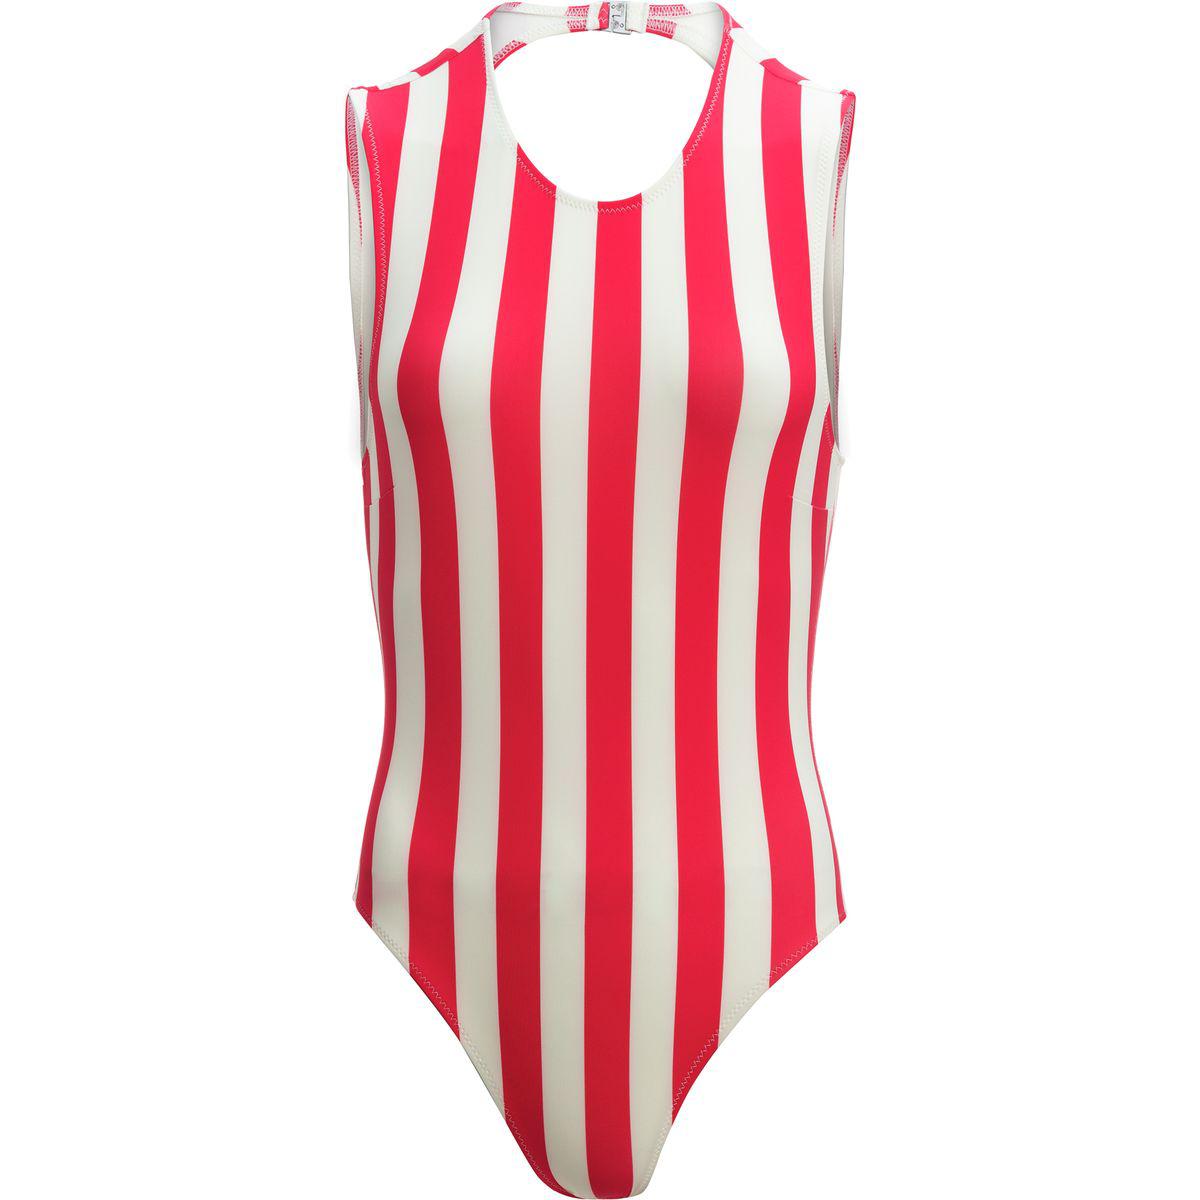 Solid & Striped Synthetic Sharon One-piece Swimsuit in Cherry Stripe ...